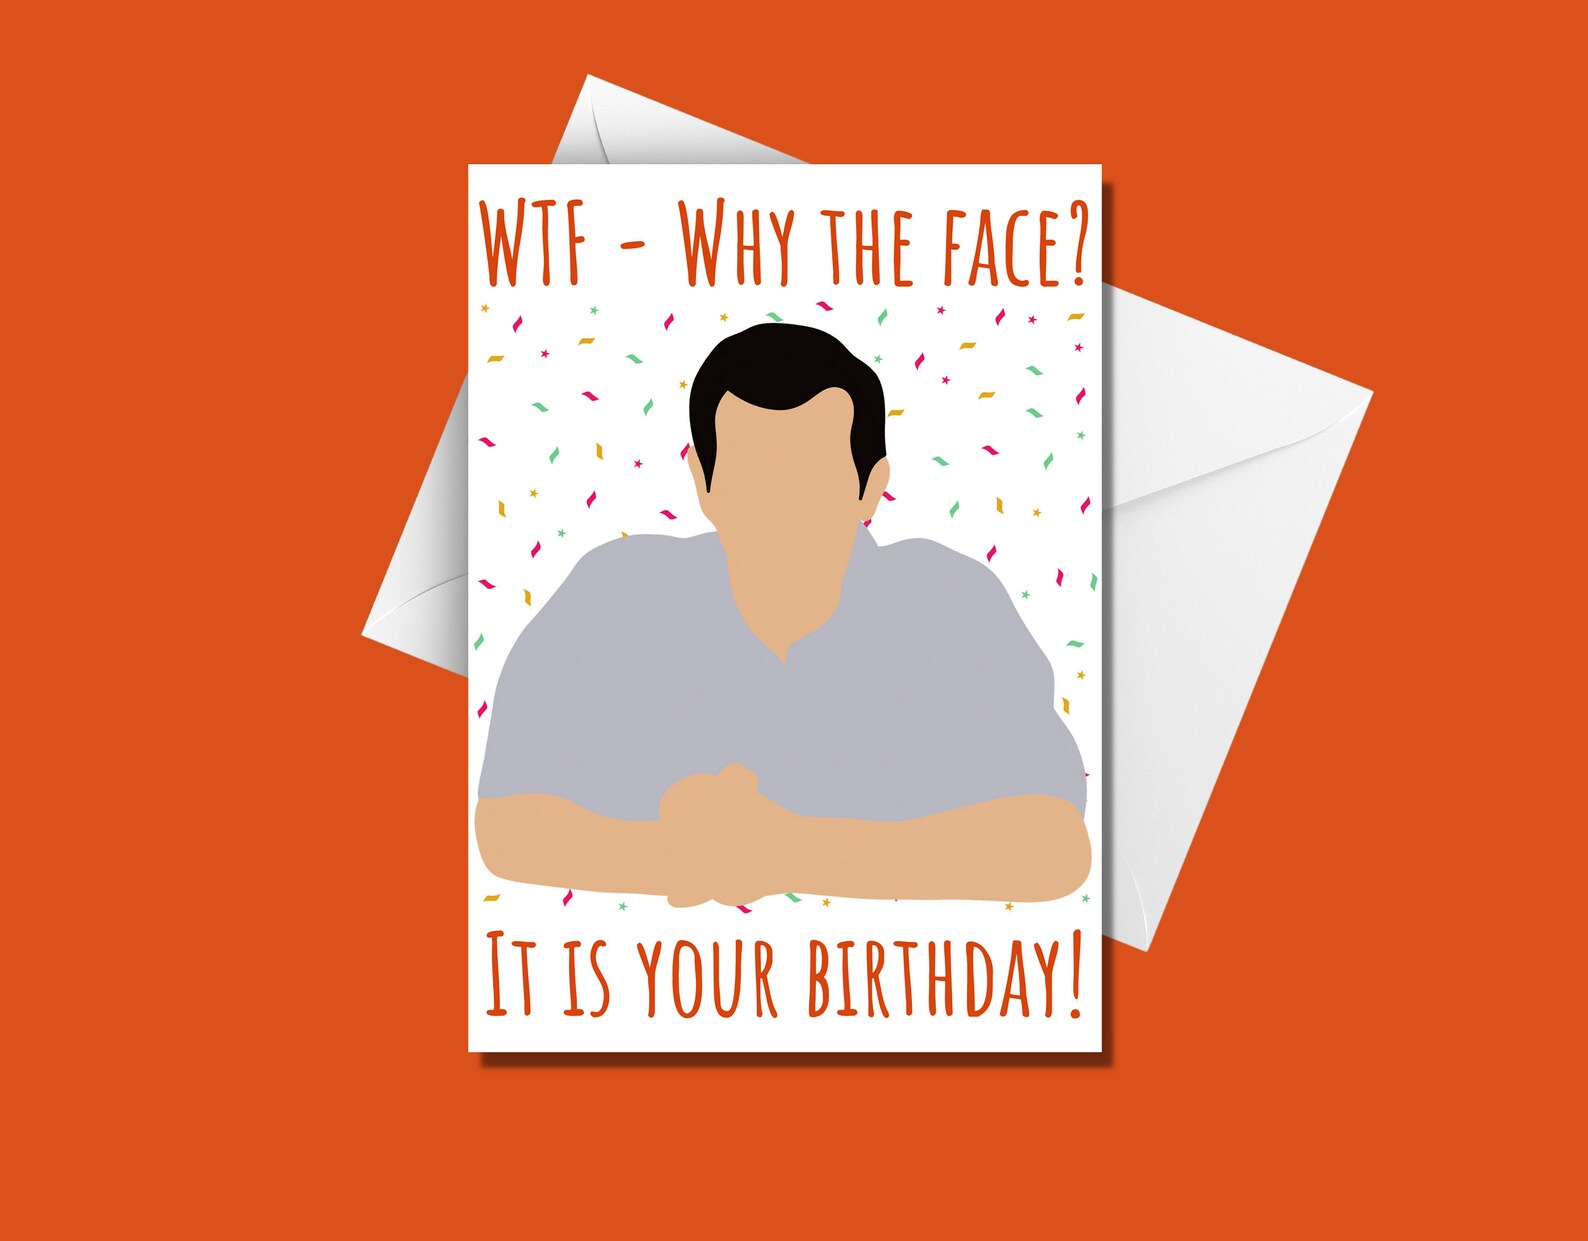 Phil Dunphy 'WTF Why the face It is your birthday' | Etsy